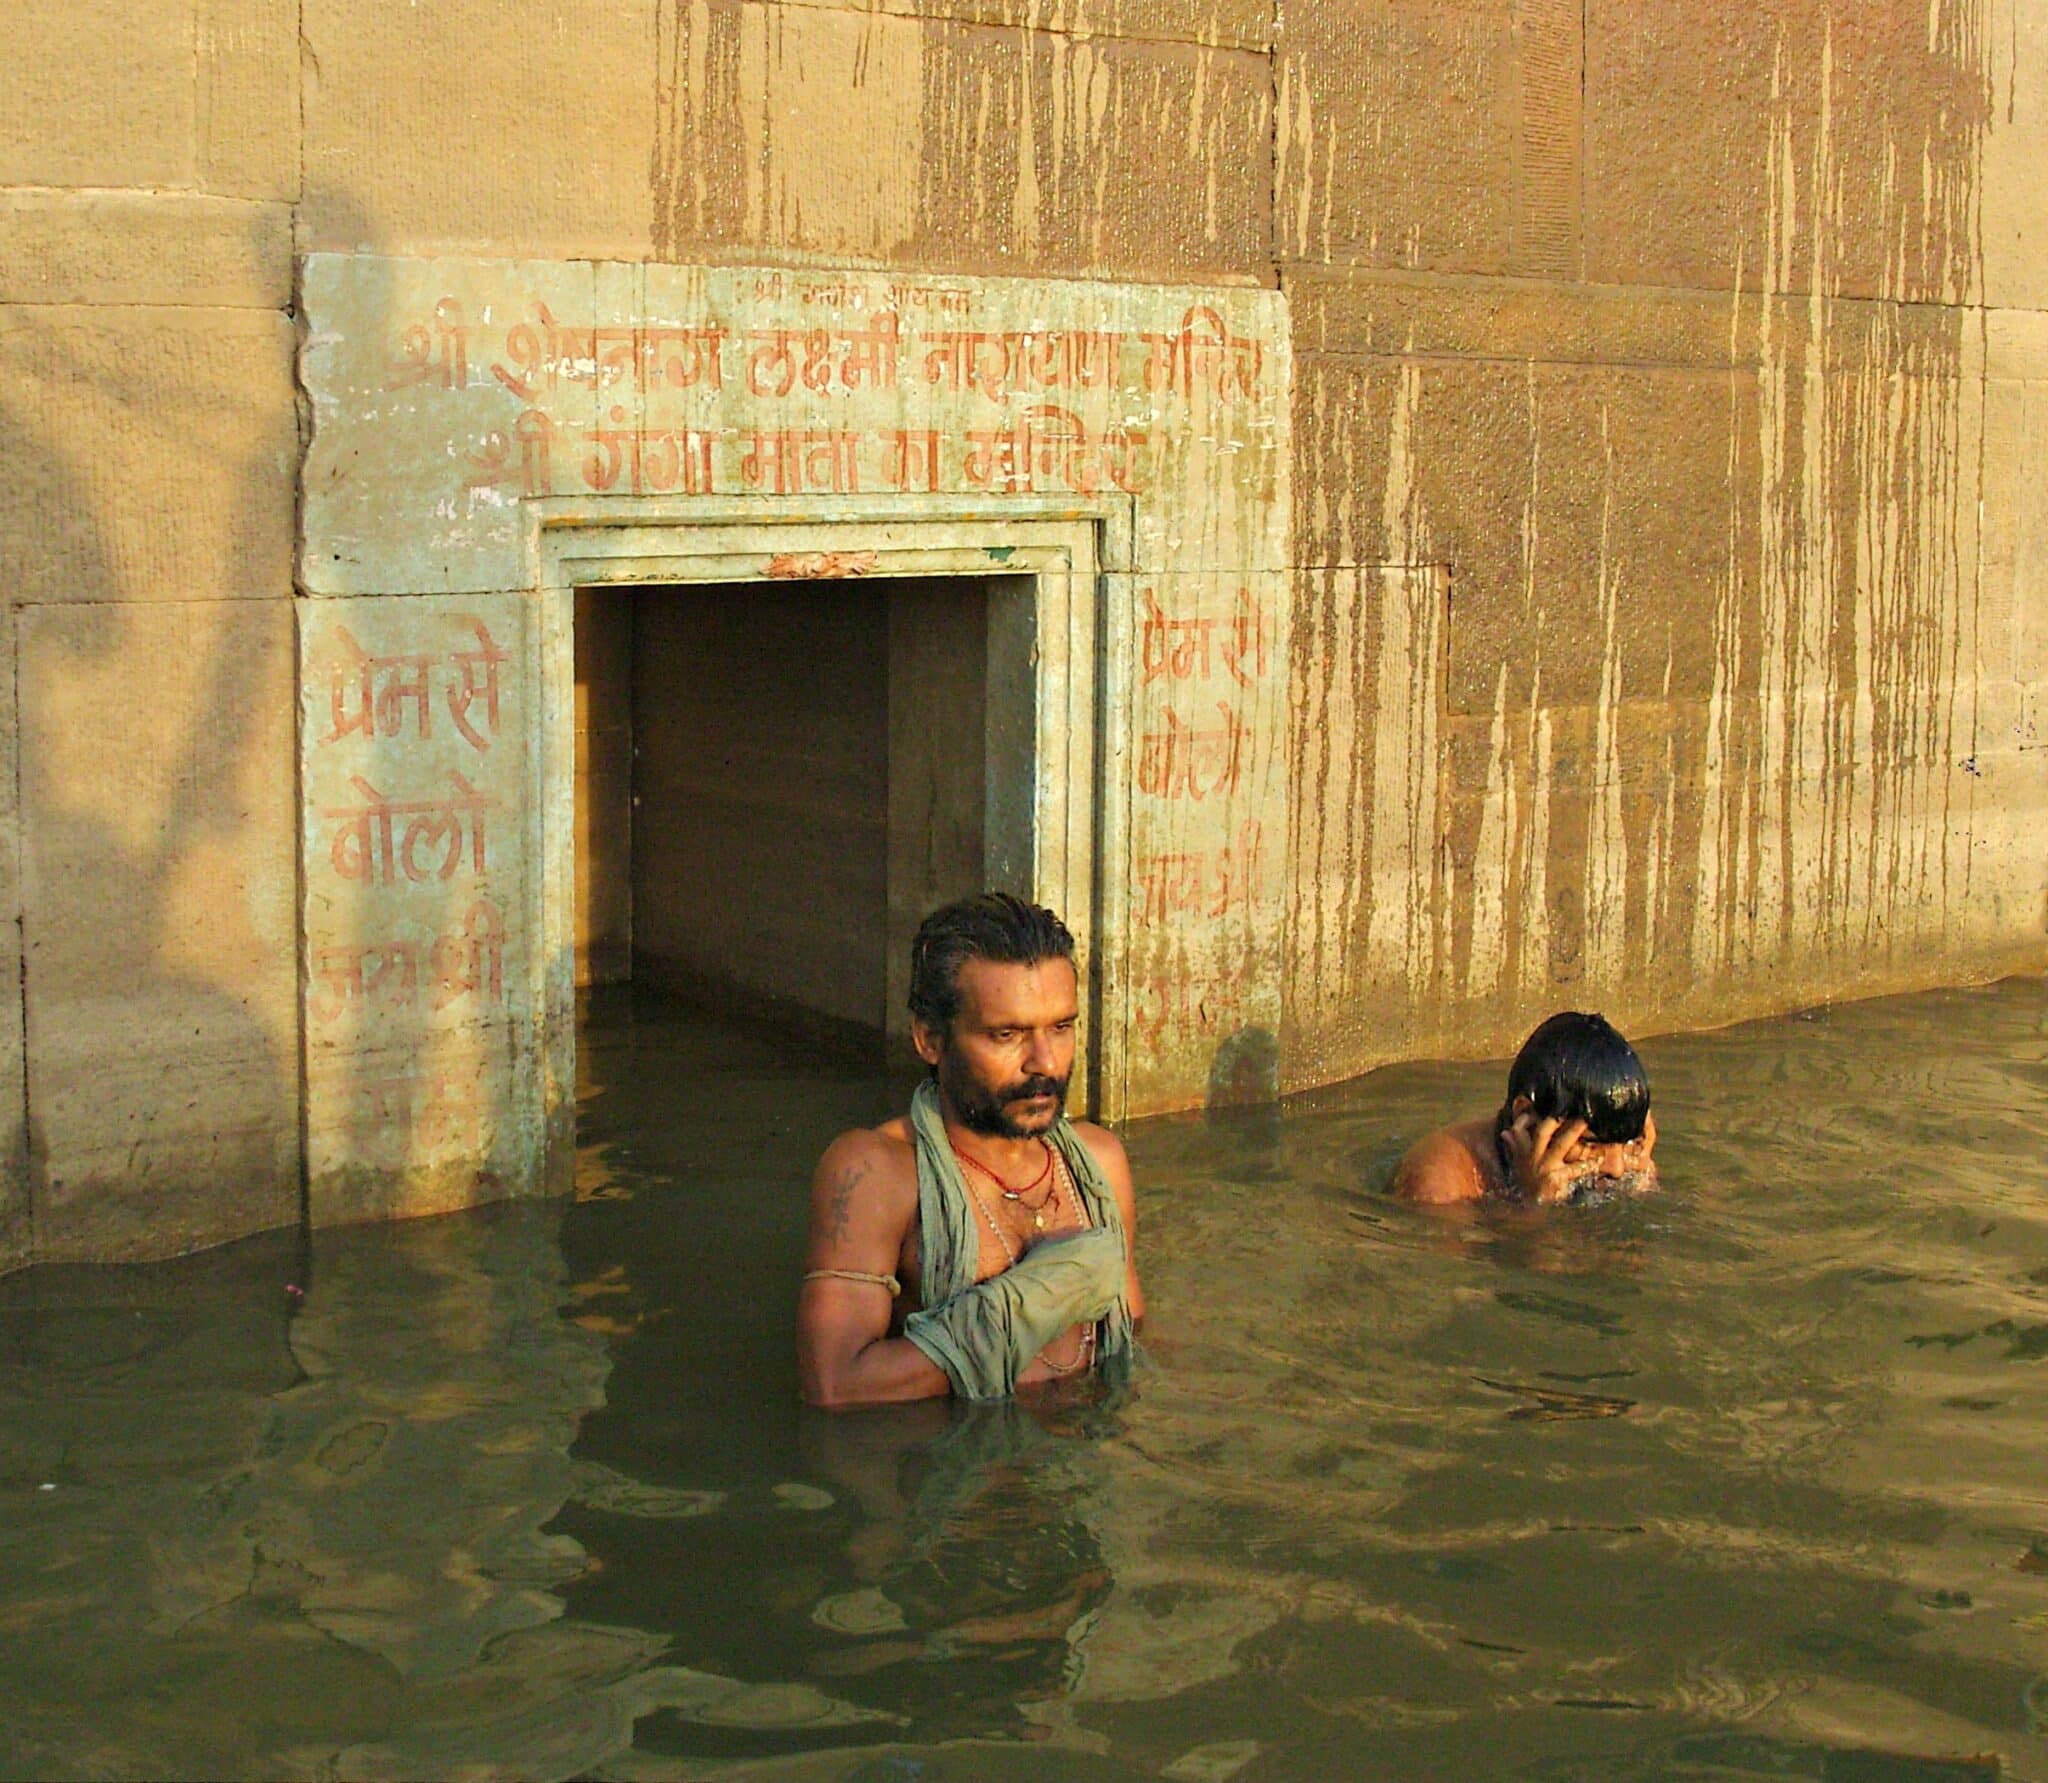 The ultimate Hindu pilgrimage: praying and cleansing in Mother Ganges